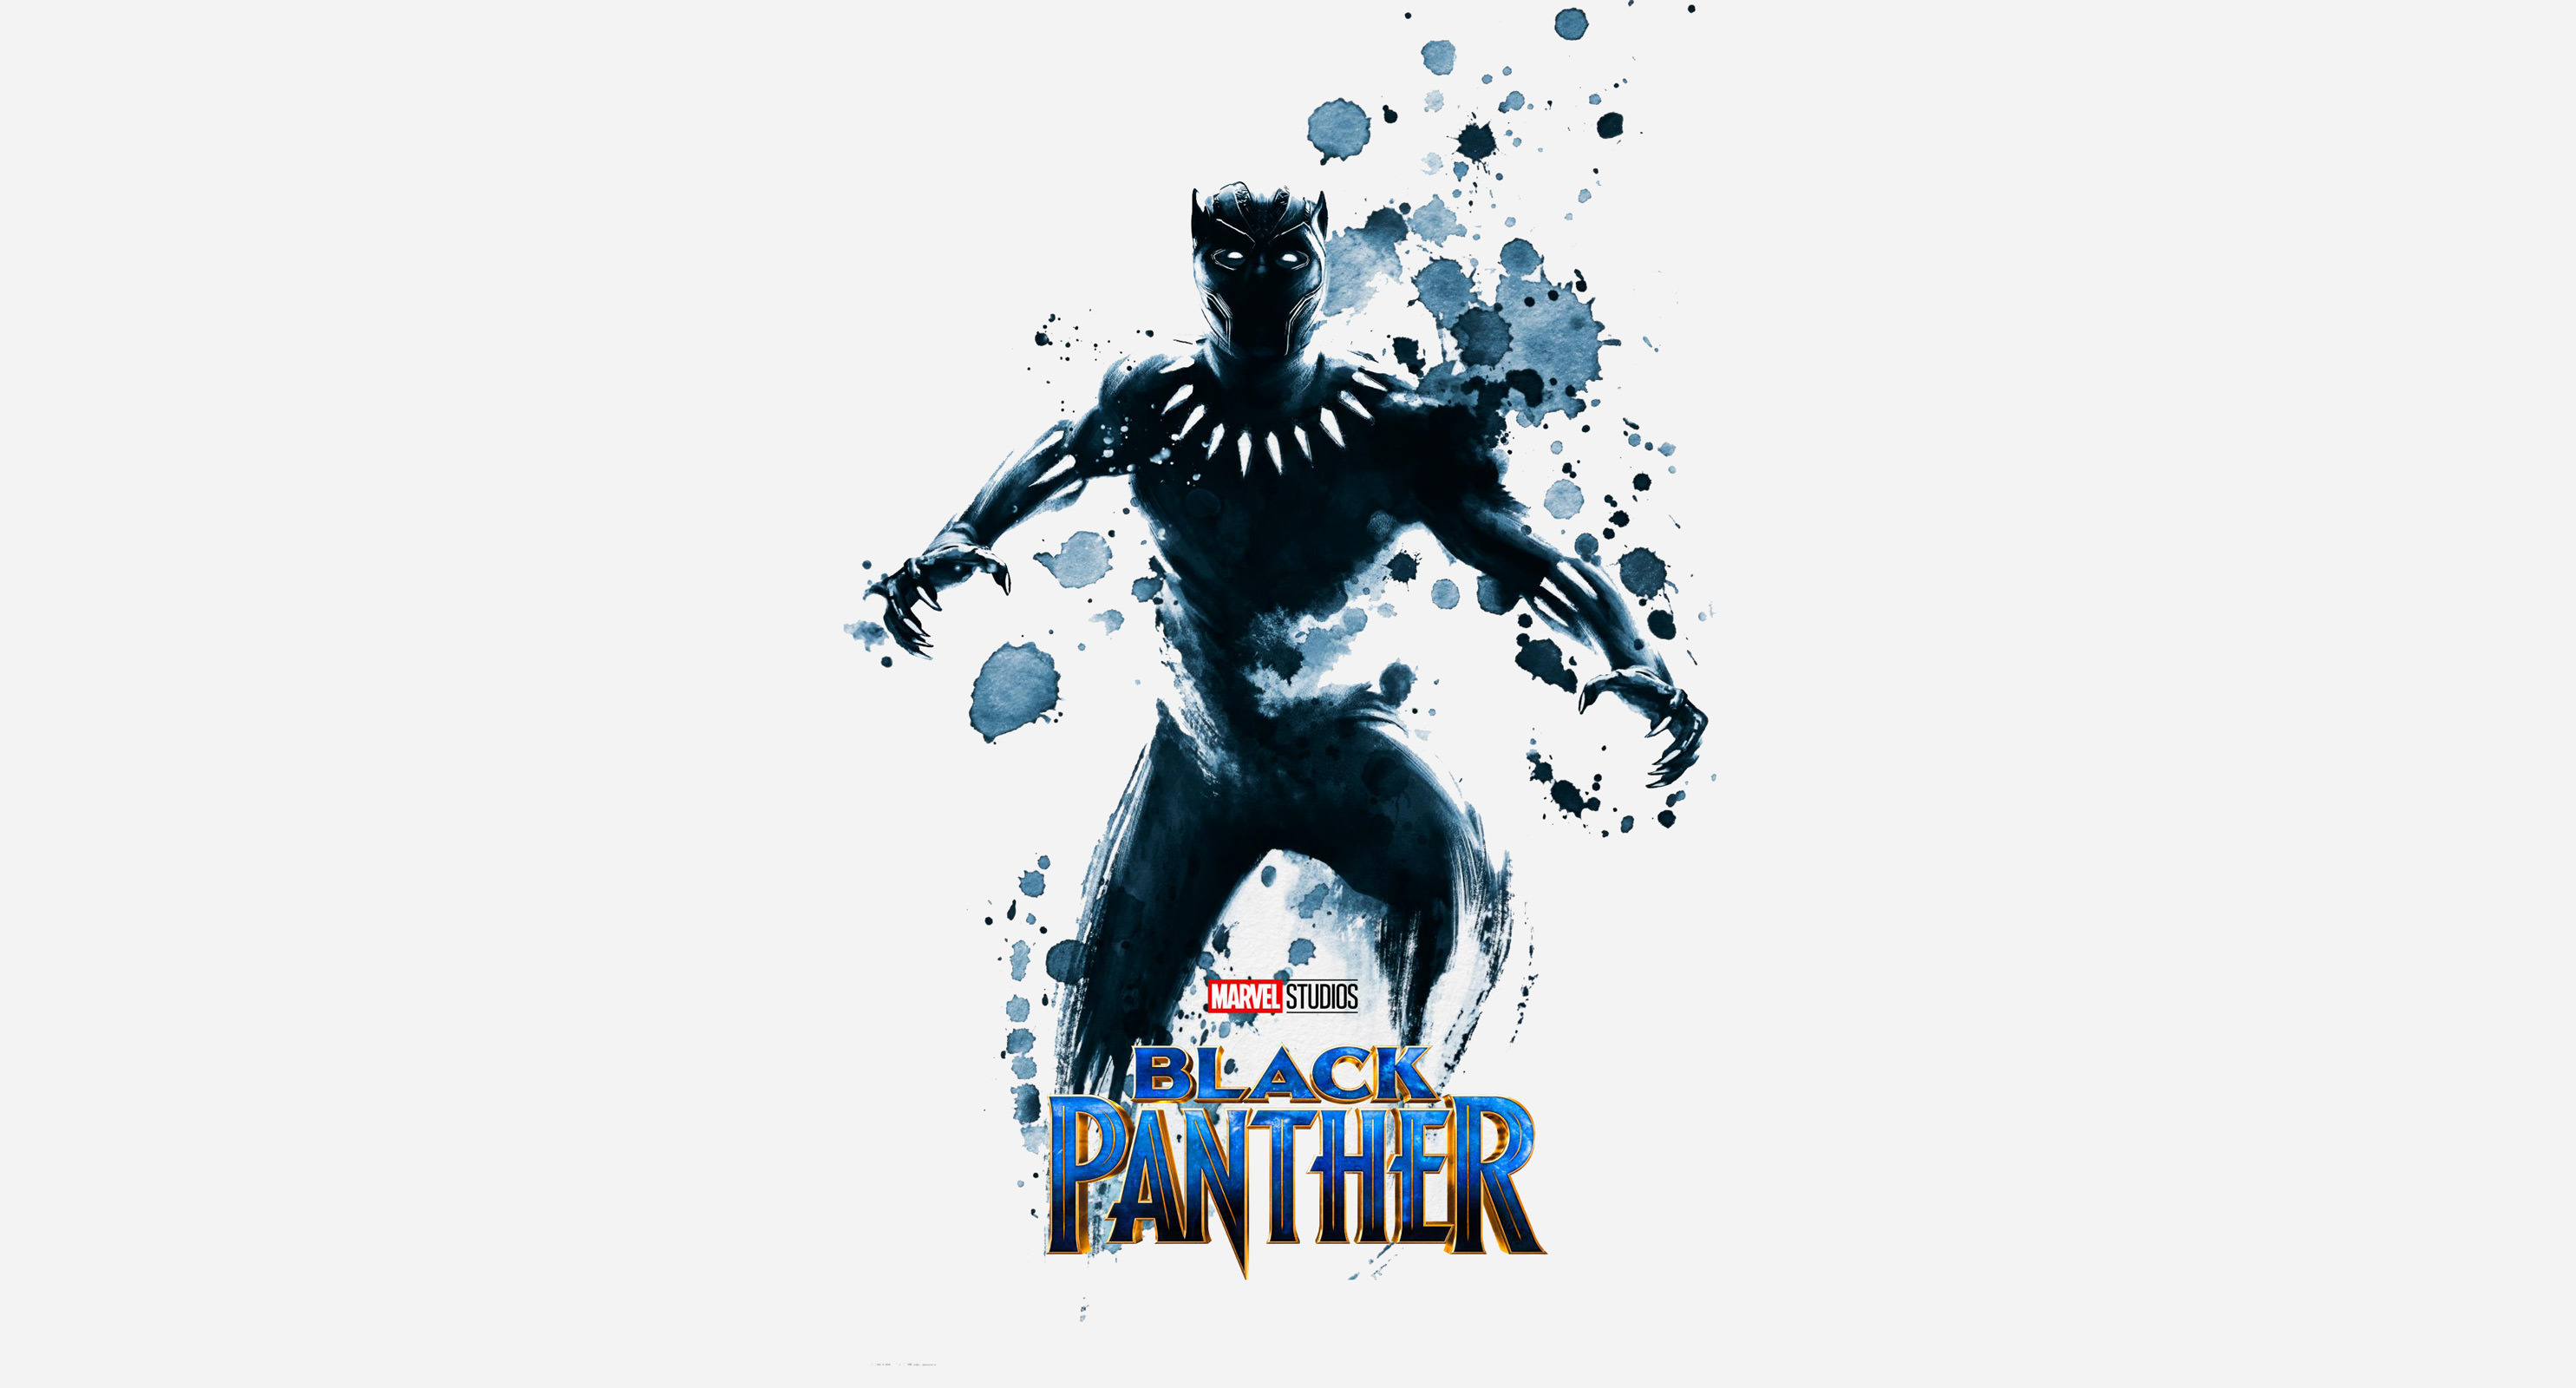 Download Black Panther Movie Official Poster 1366x768 Resolution